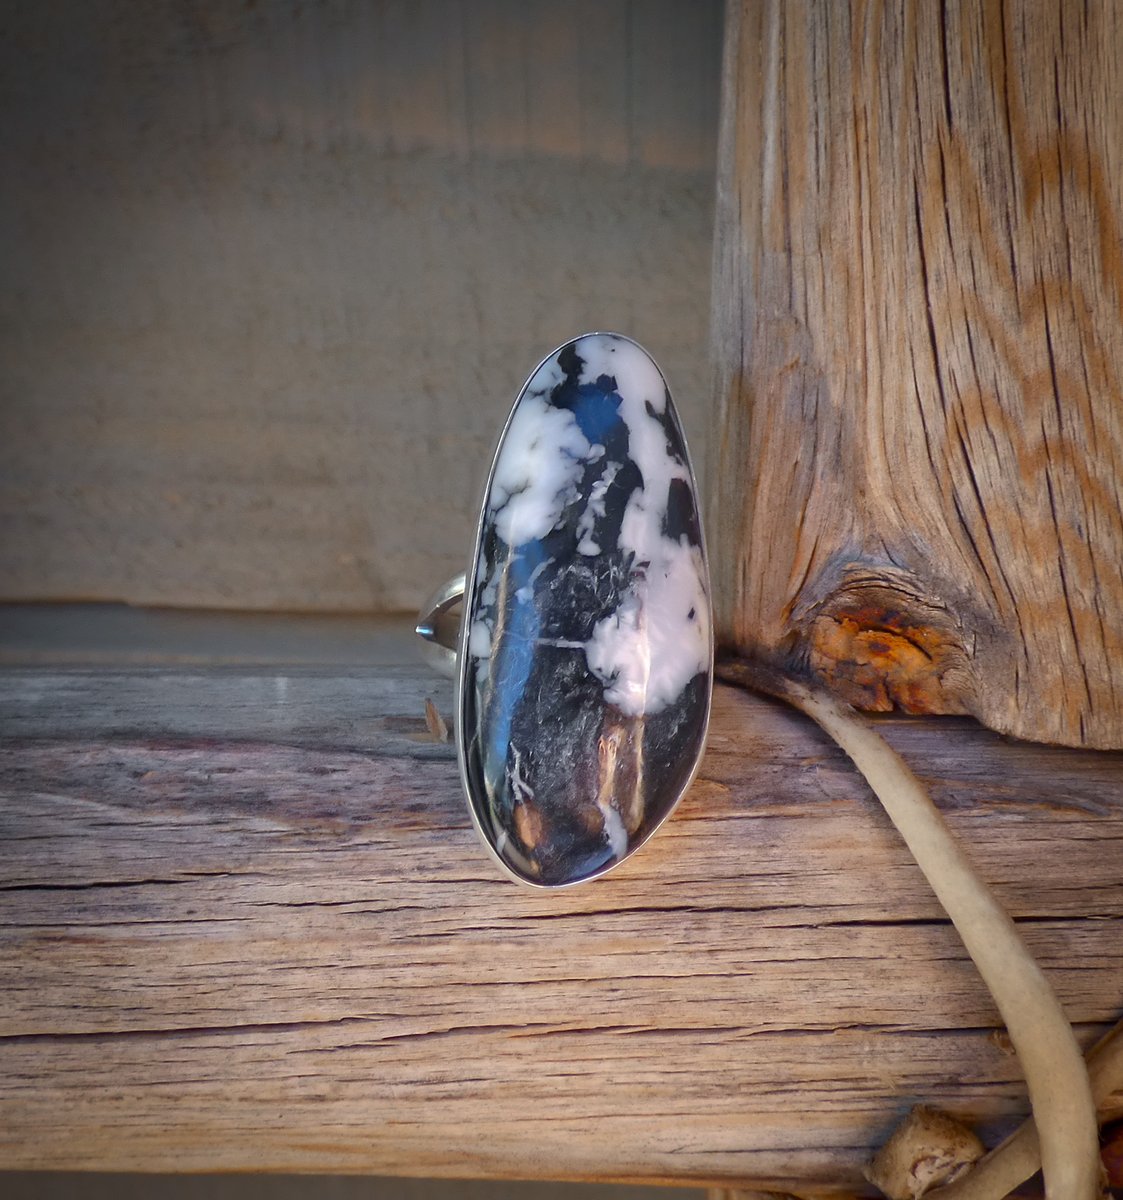 🤠Save $$! Just listed this stunning White Buffalo Ring. Check it out here:🤠ow.ly/16fl50LKo8K #whitebuffaloring #sacredbuffalo #NativeAmerican #statementring #NativeAmericanjewelry #Indianjewelry